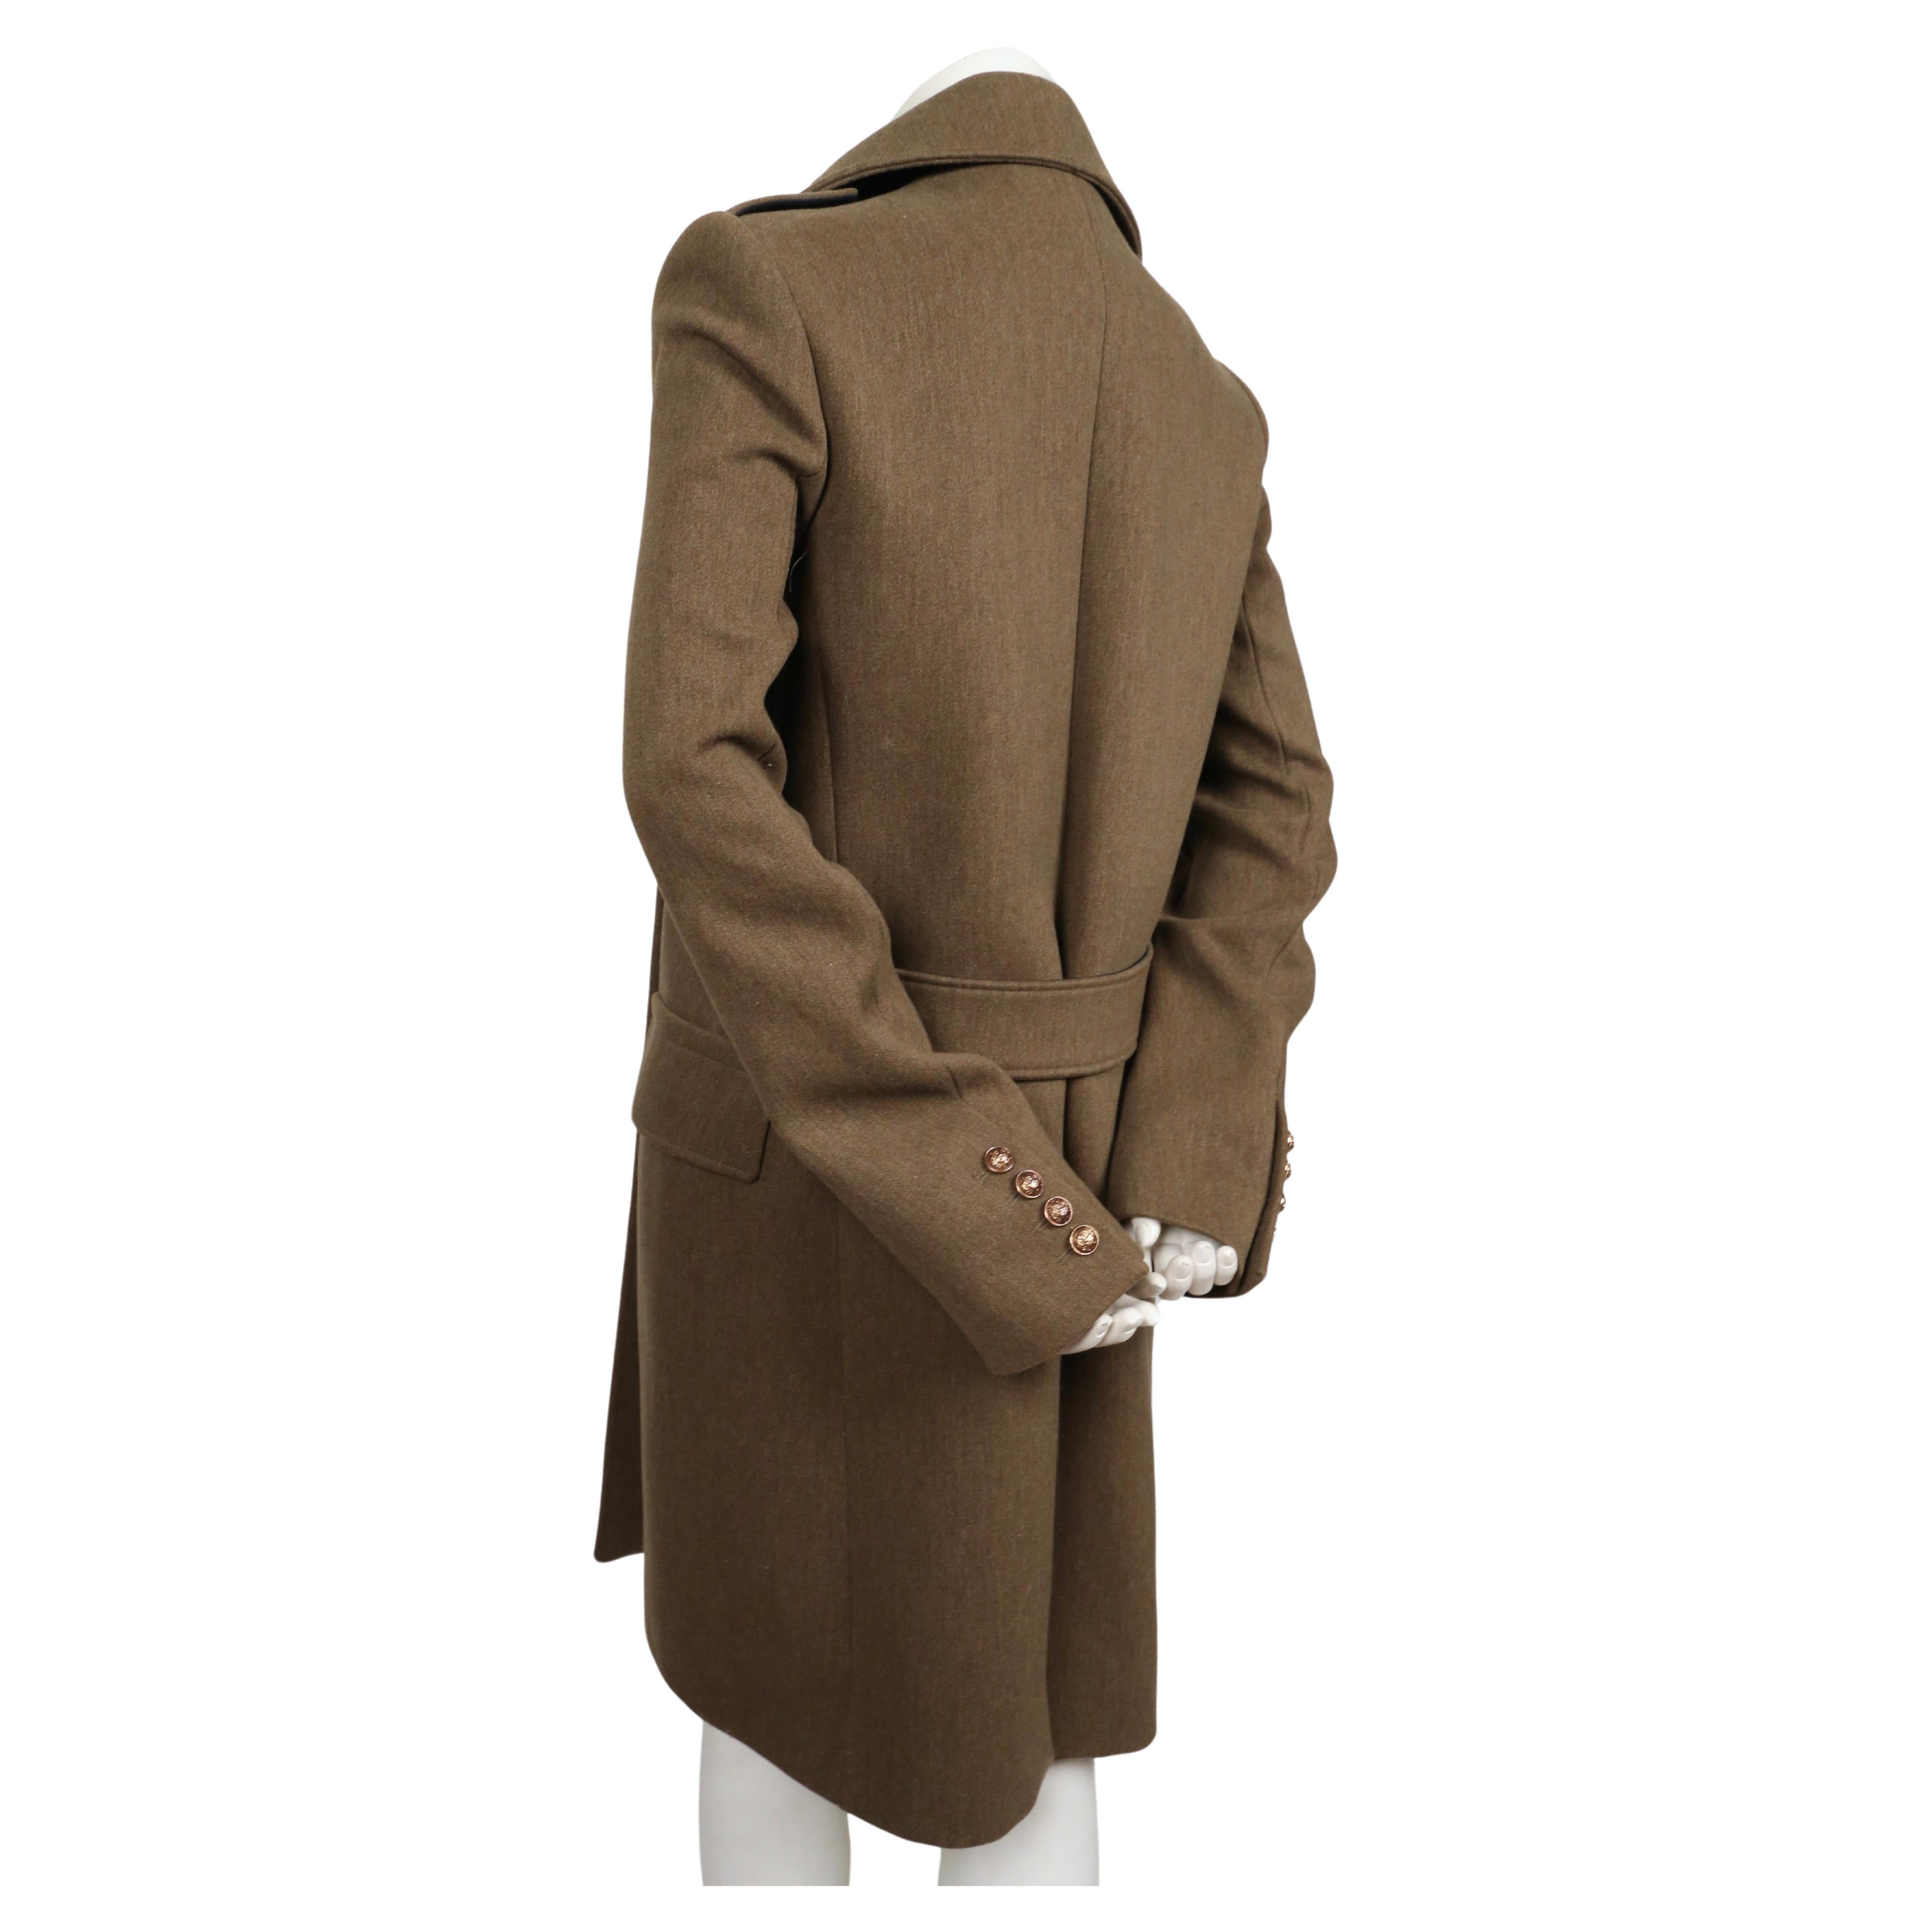 2011 BALMAIN olive green melton wool long military coat - new with tags For Sale 1